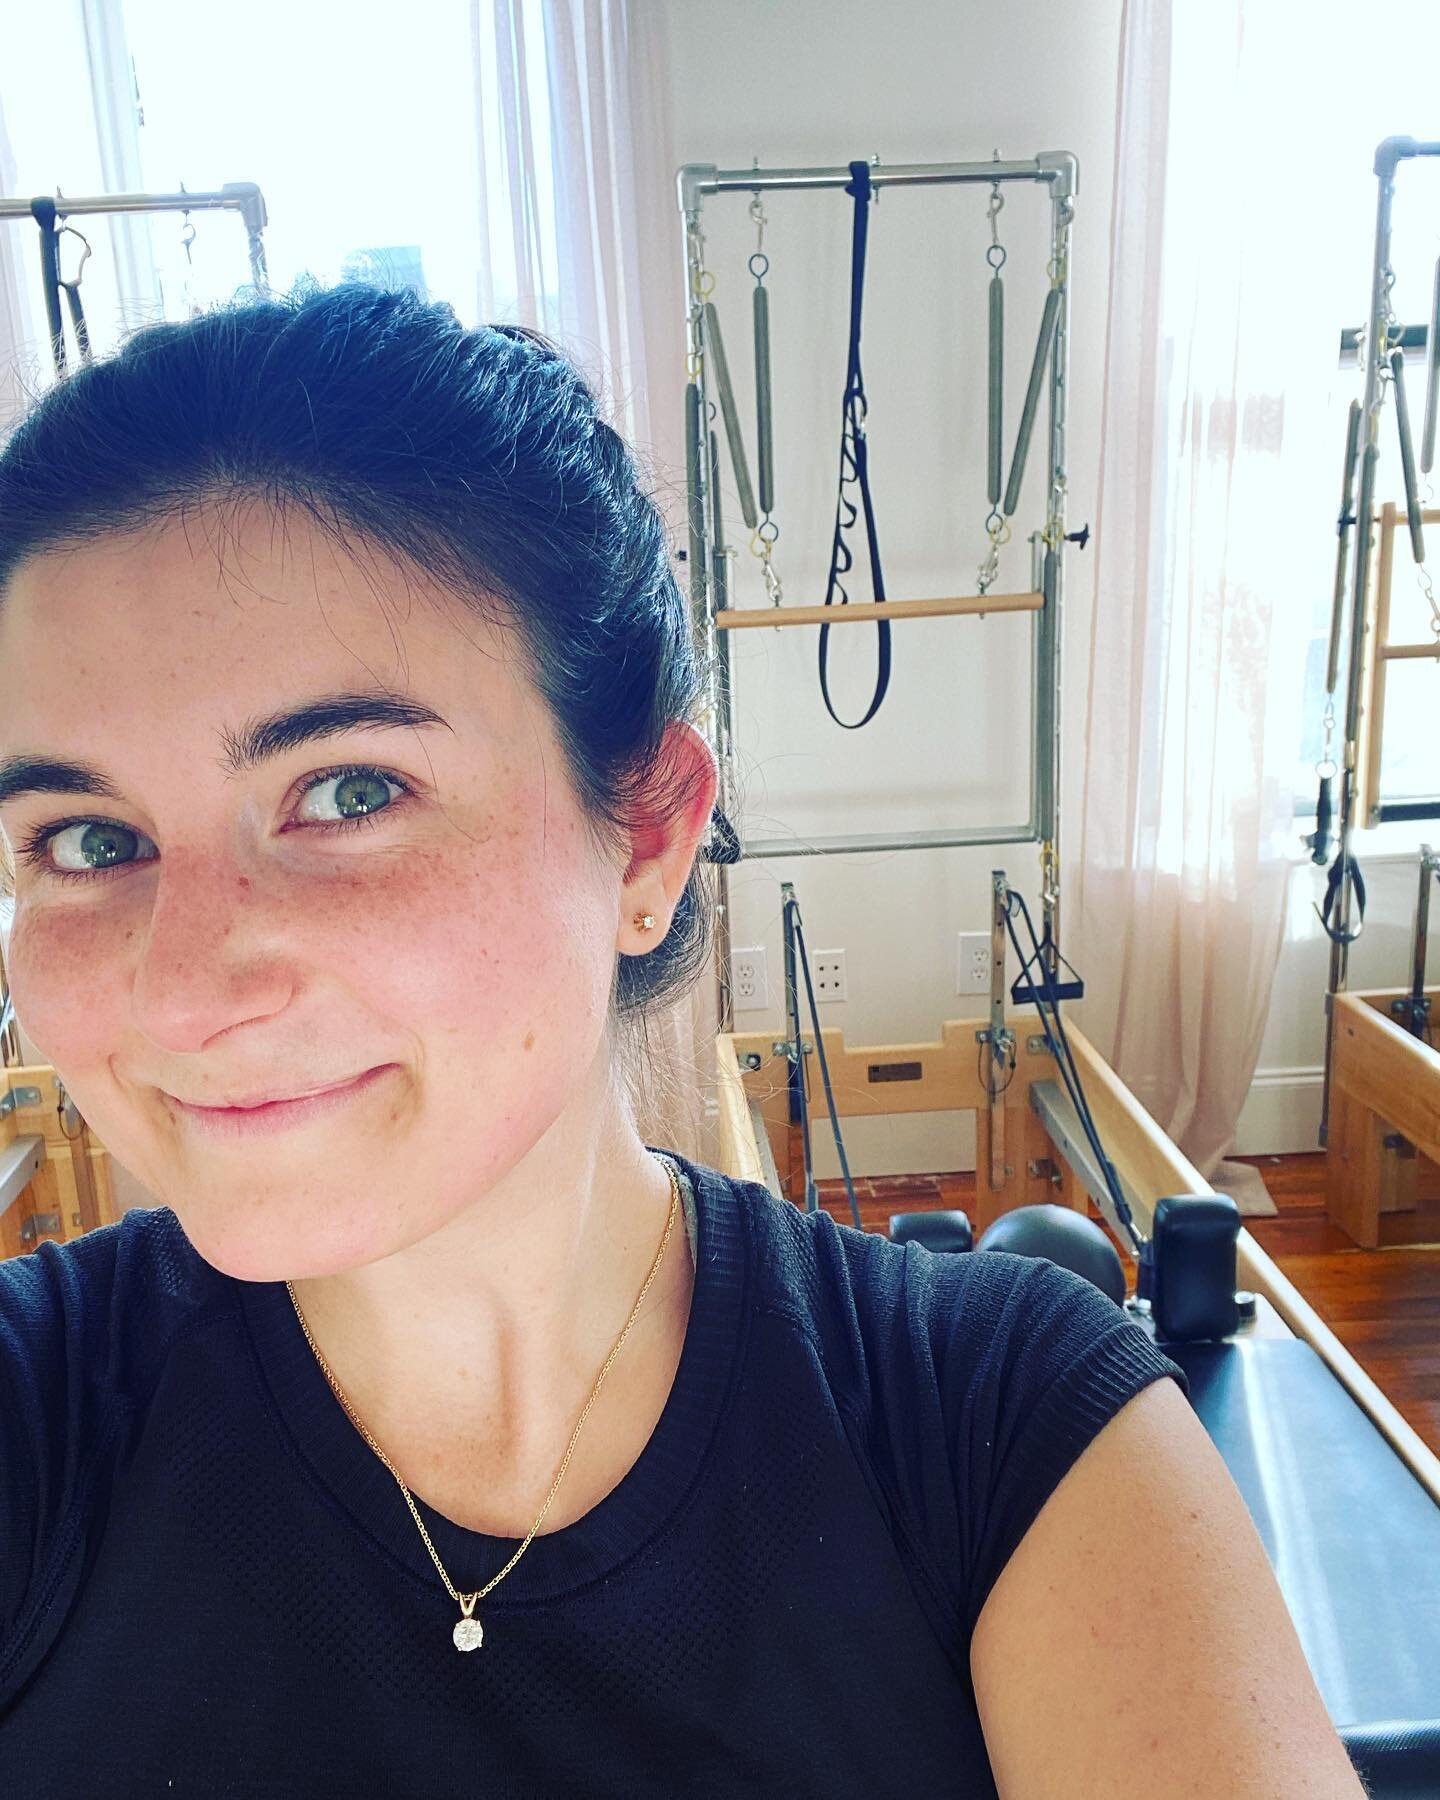 Join me in welcoming Abigail to the Town Pilates team! 

Here&rsquo;s a little bit about her!

&ldquo;I grew up in Gainesville, and I am a legal assistant here in town!  I love building community and bringing people together. While Pilates instructor